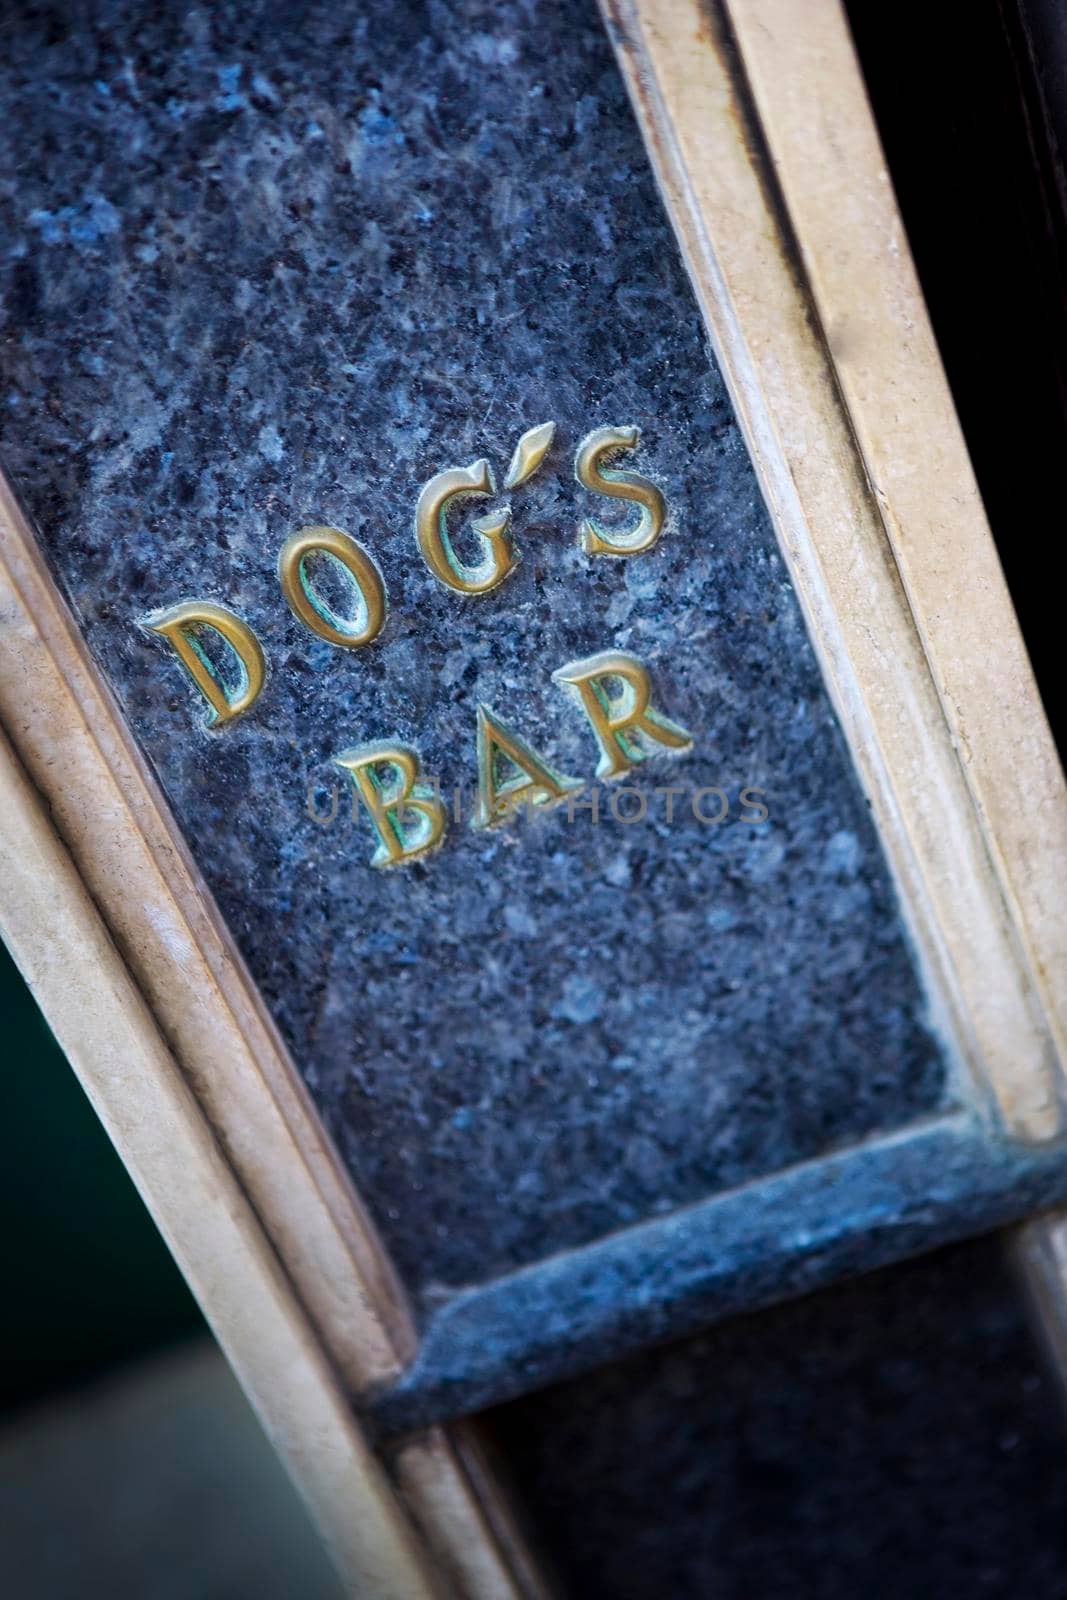 Facade of a dog bar in the city of Bordeaux, France